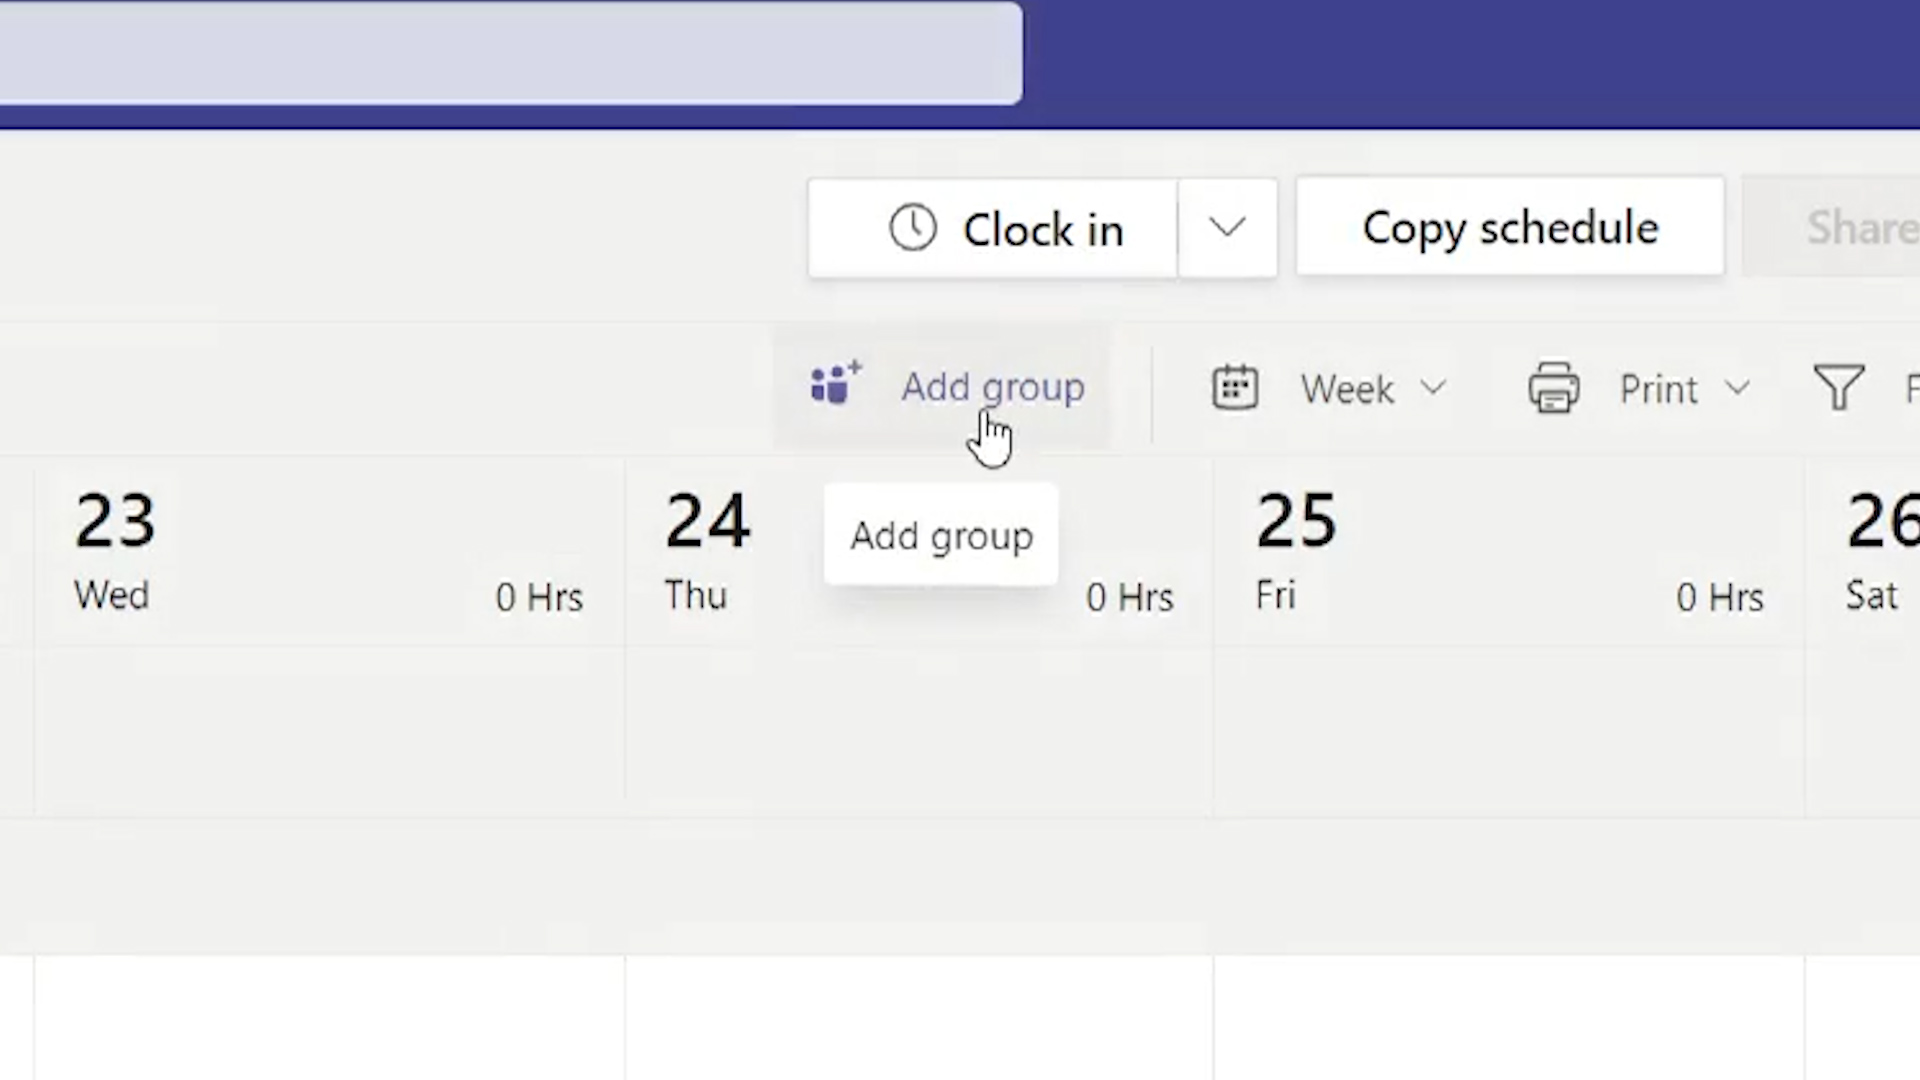 Screenshot showing how to add new shift groups in the Shifts app in Microsoft Teams